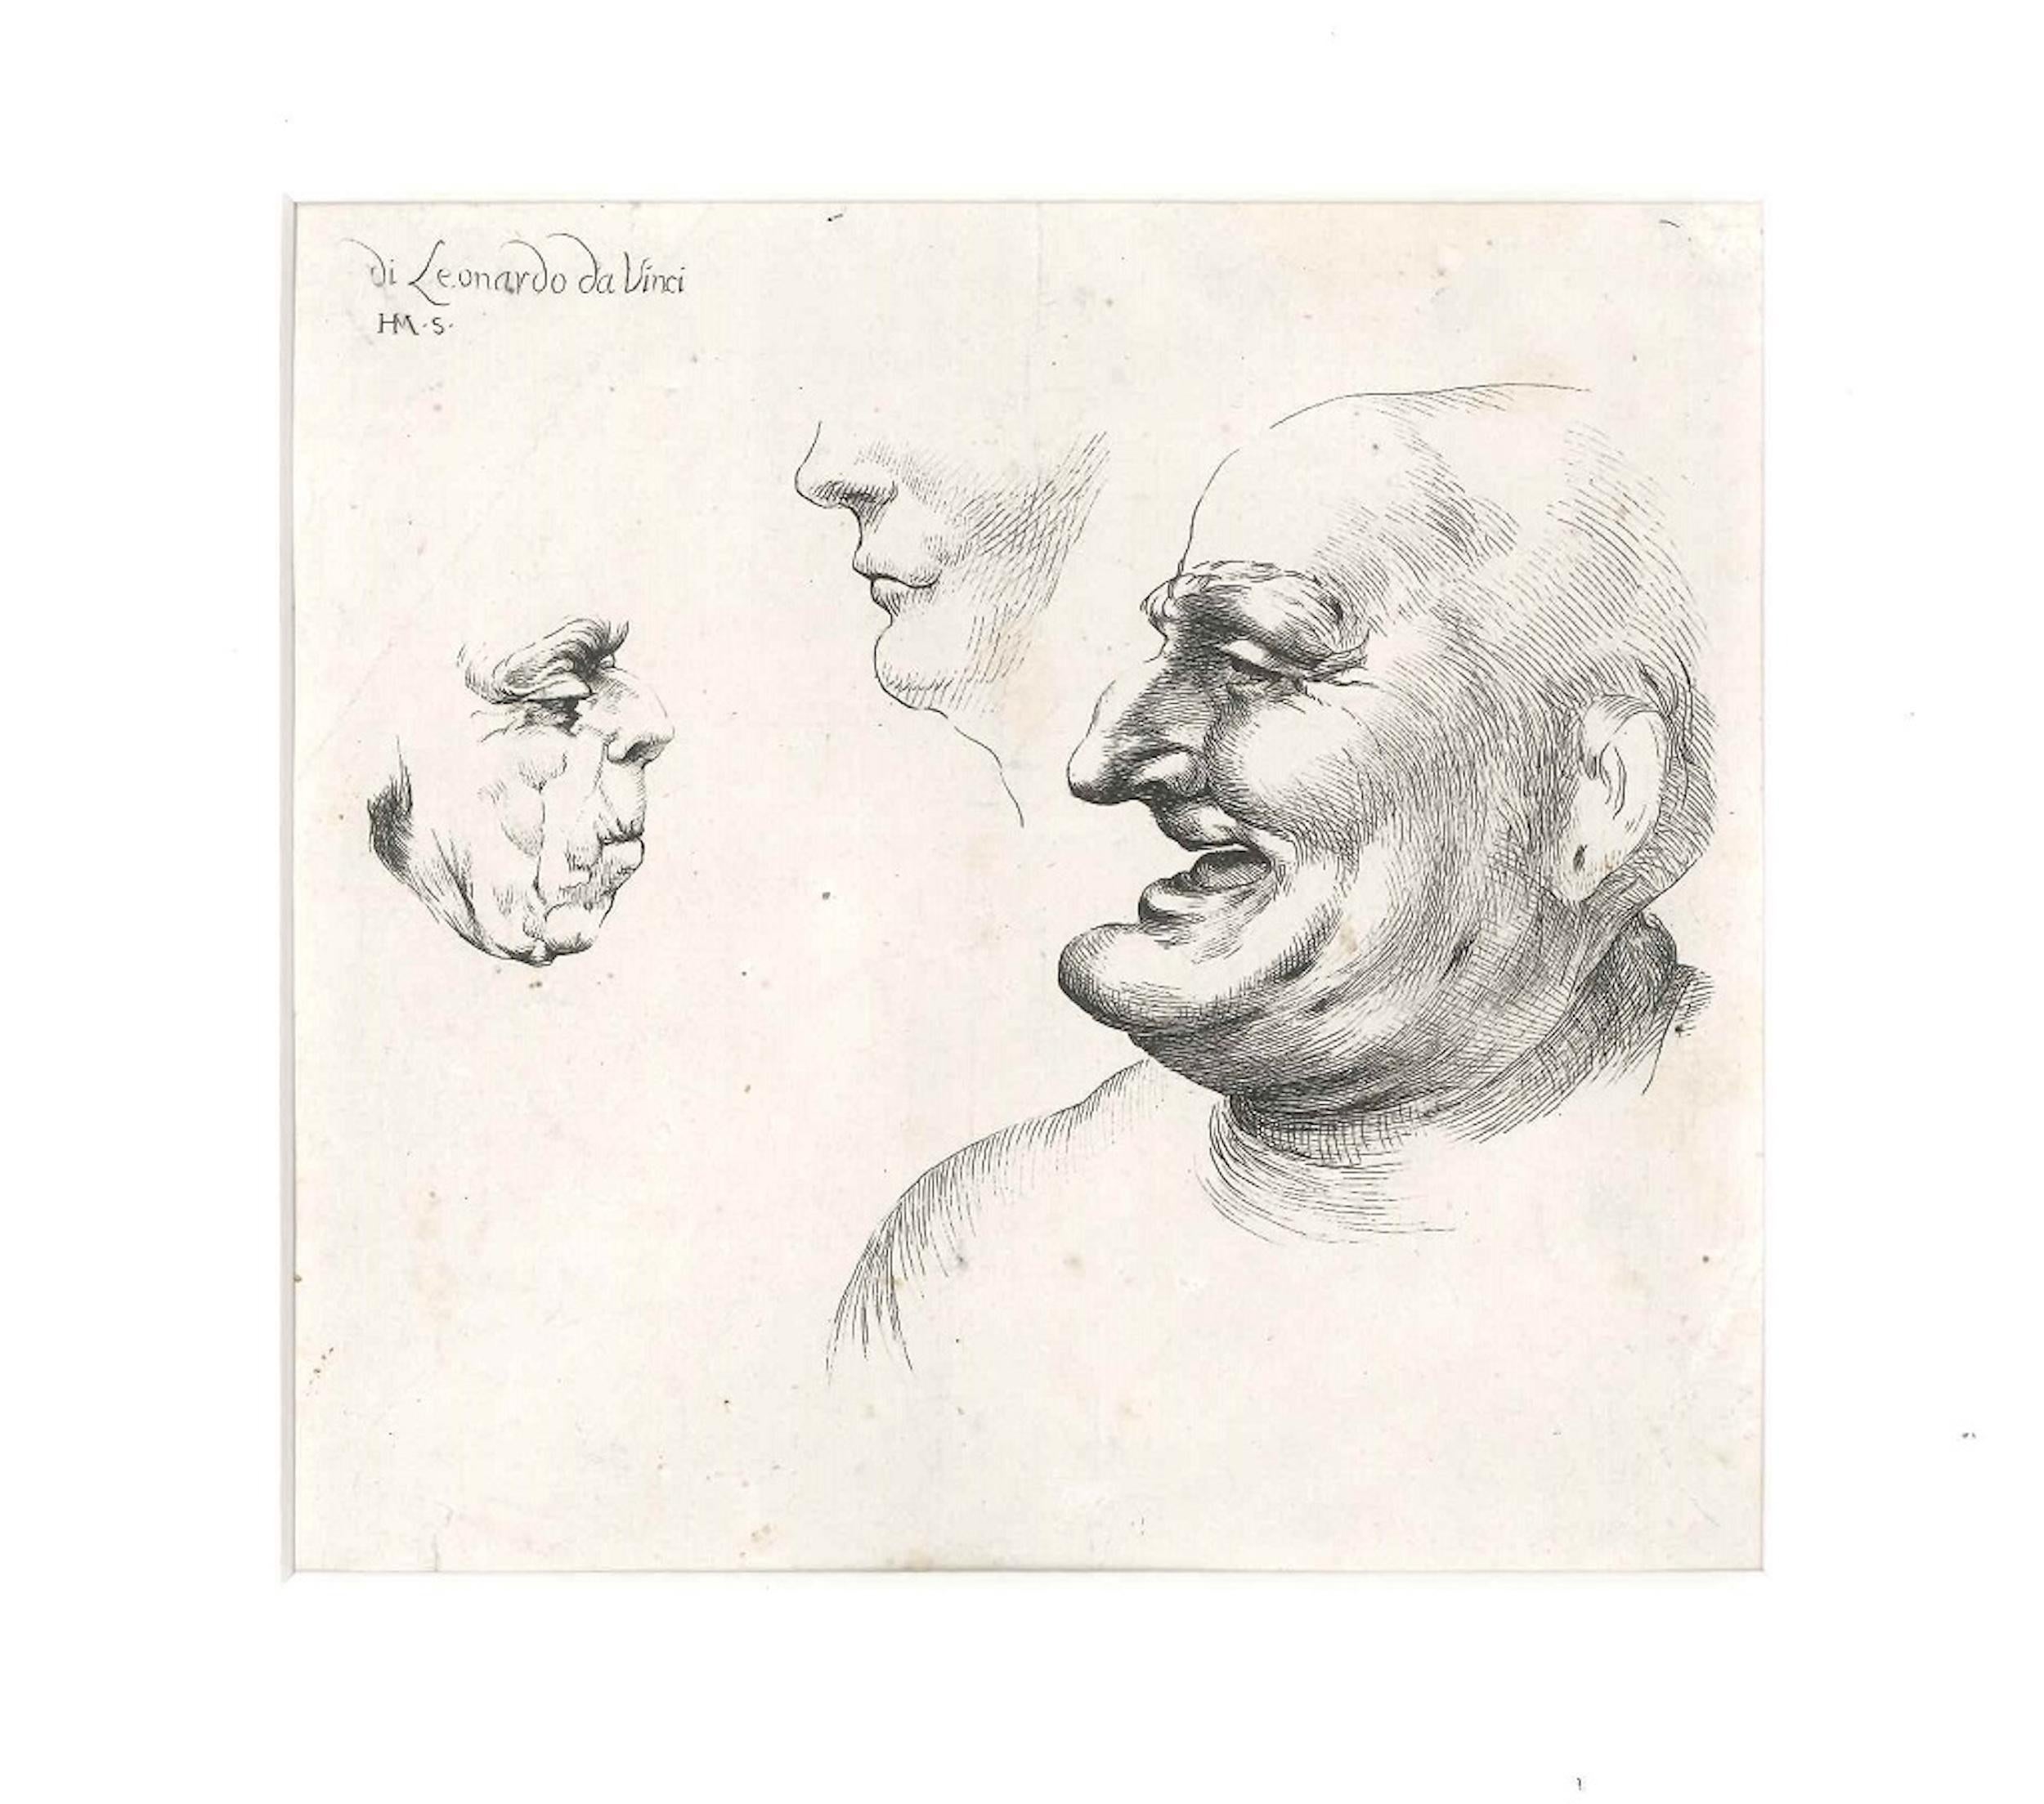 Three Grotesque Heads After Leonardo da Vinci - Late 17th Century - Print by Unknown